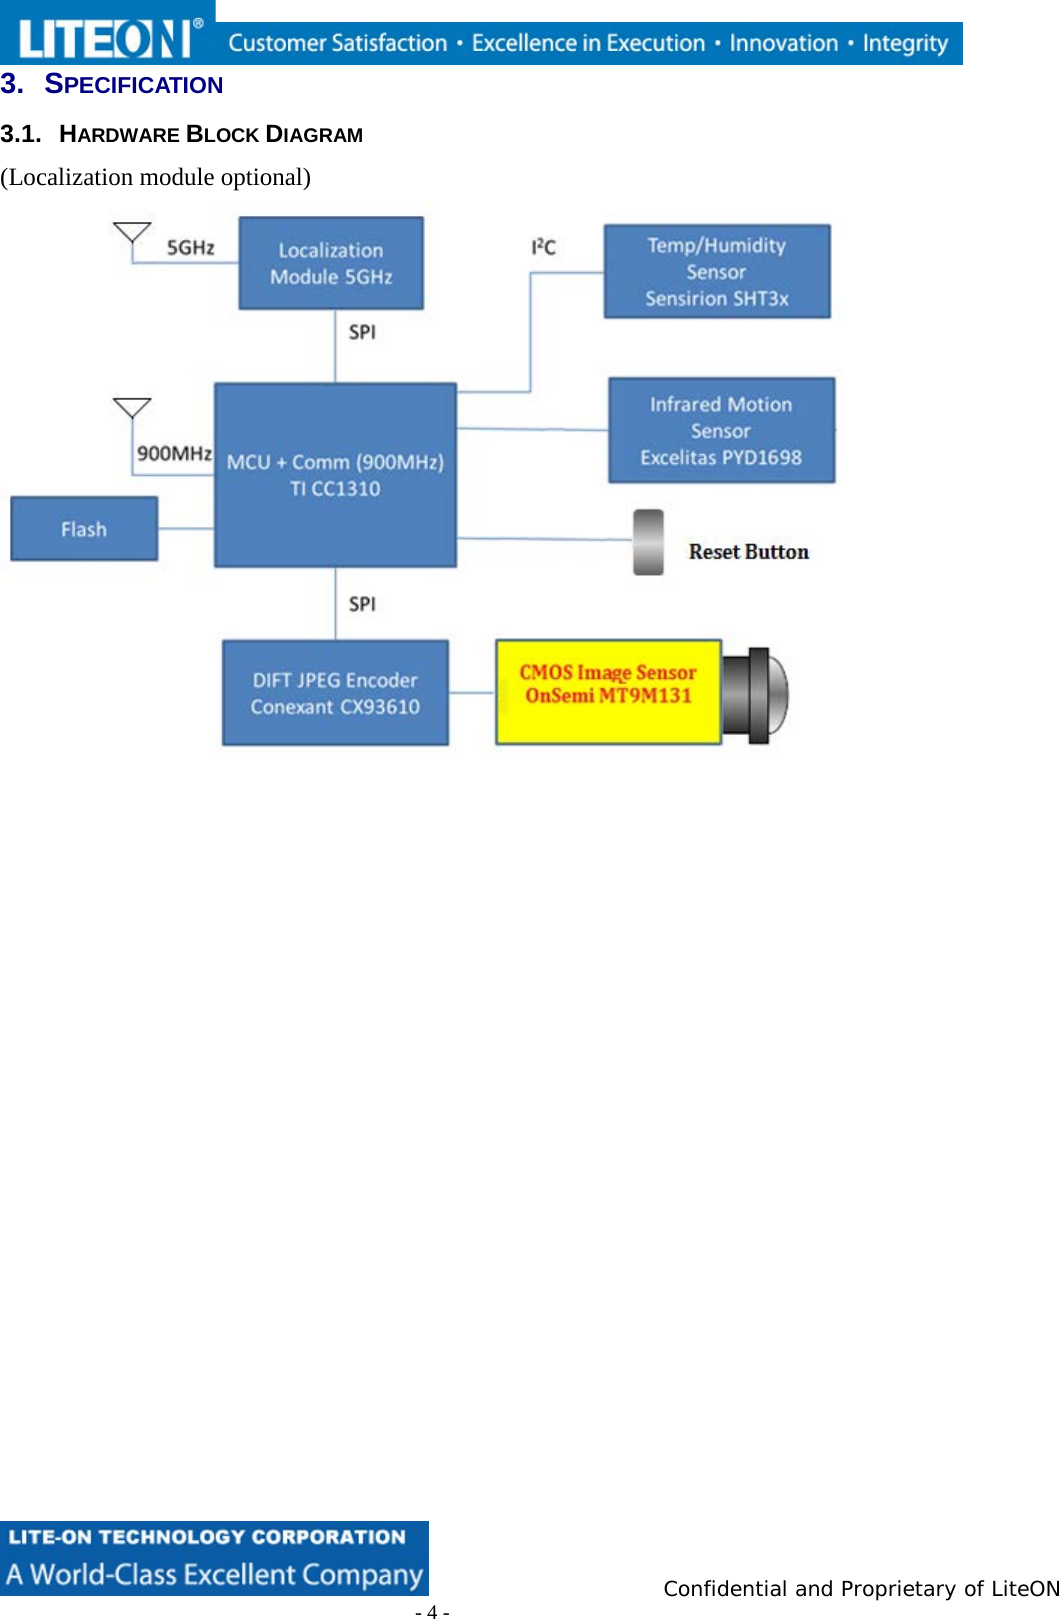                          Confidential and Proprietary of LiteON                         - 4 - 3.  SPECIFICATION 3.1.  HARDWARE BLOCK DIAGRAM  (Localization module optional)     